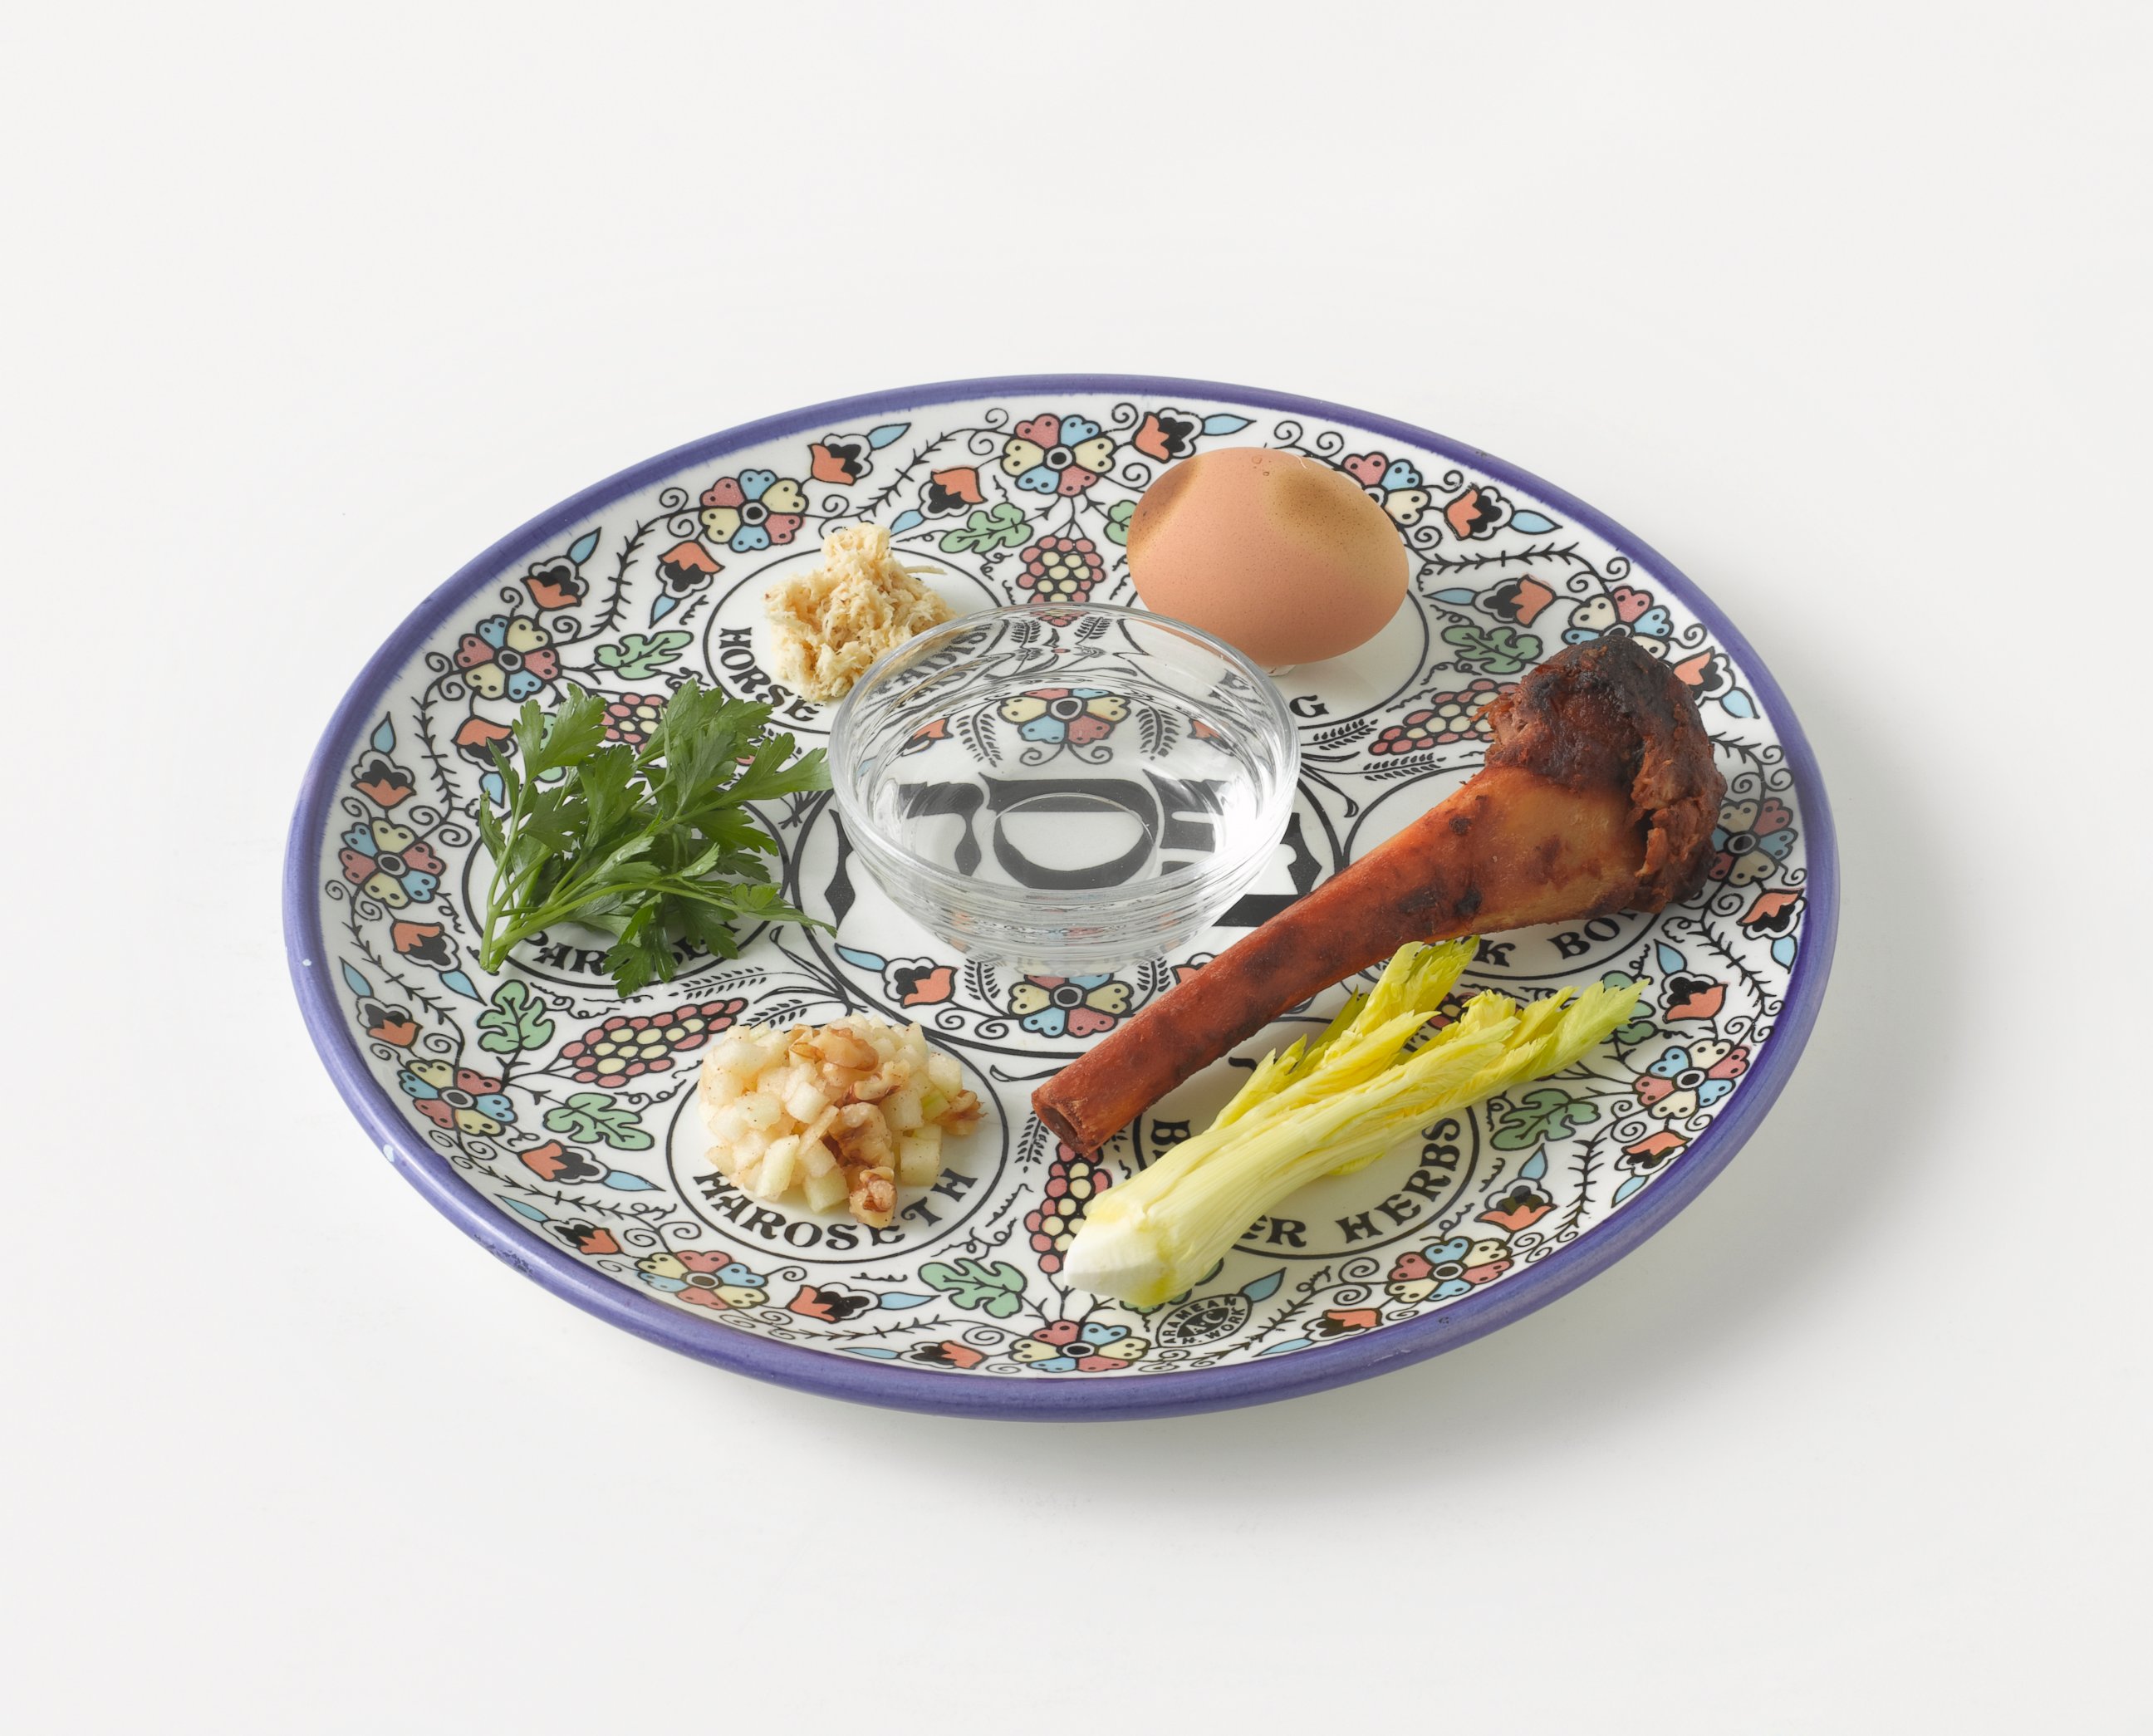 PHOTO: A Passover Seder of roasted egg, roasted bone, parsley, charoset, celery, nuts and salt water on a plate.